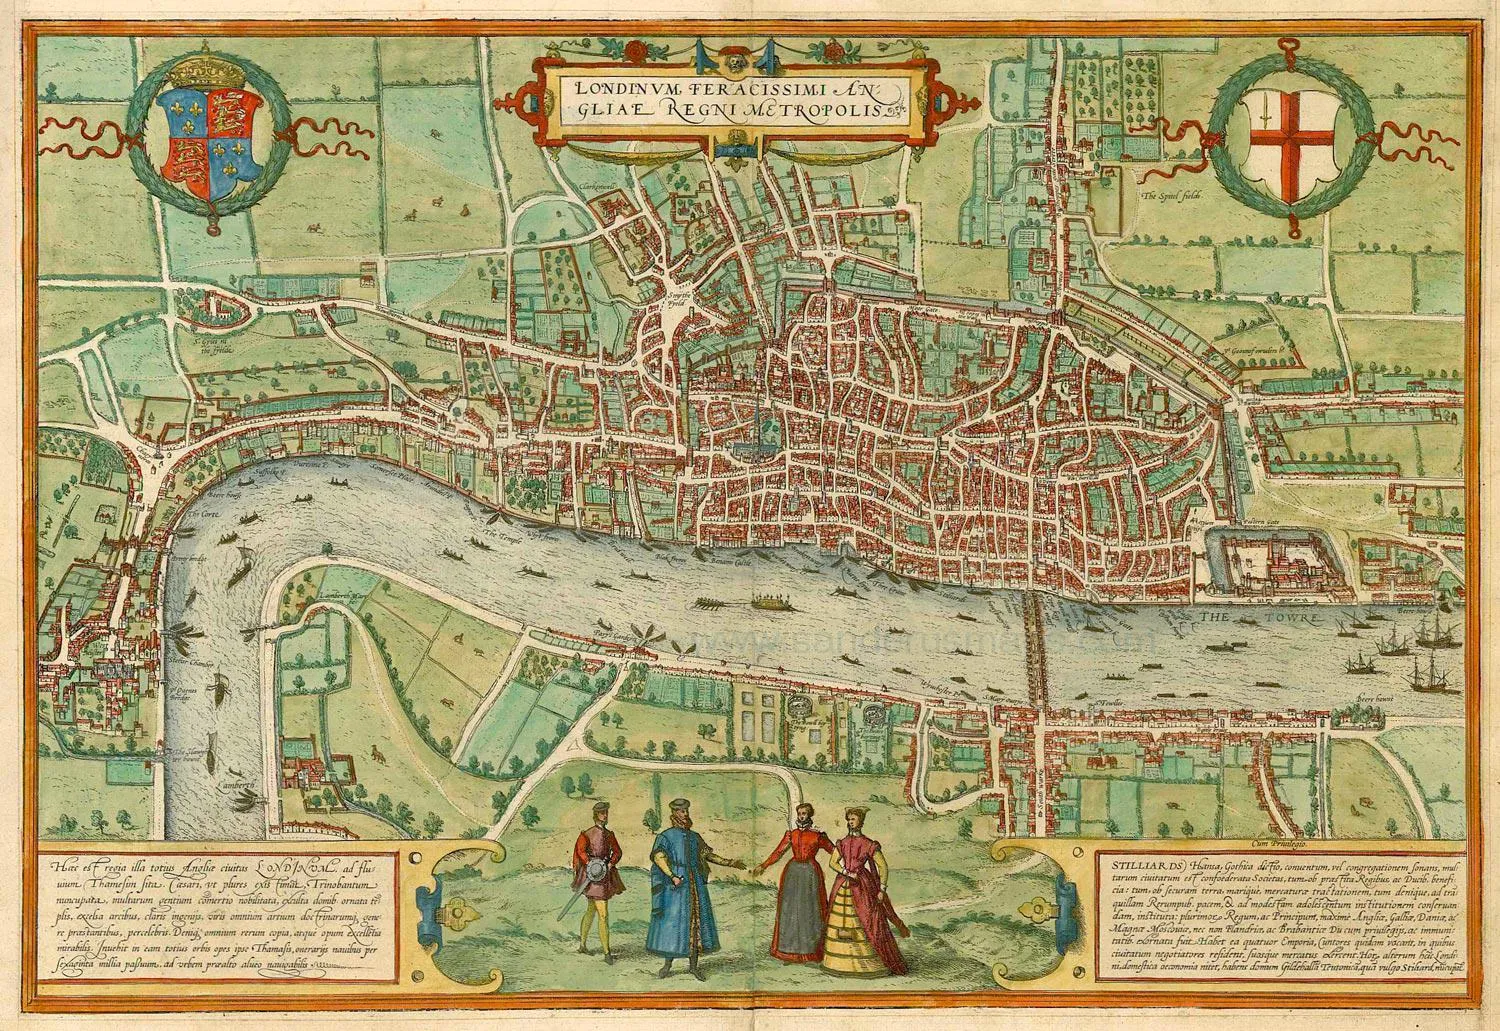 Image of a Medieval map of London